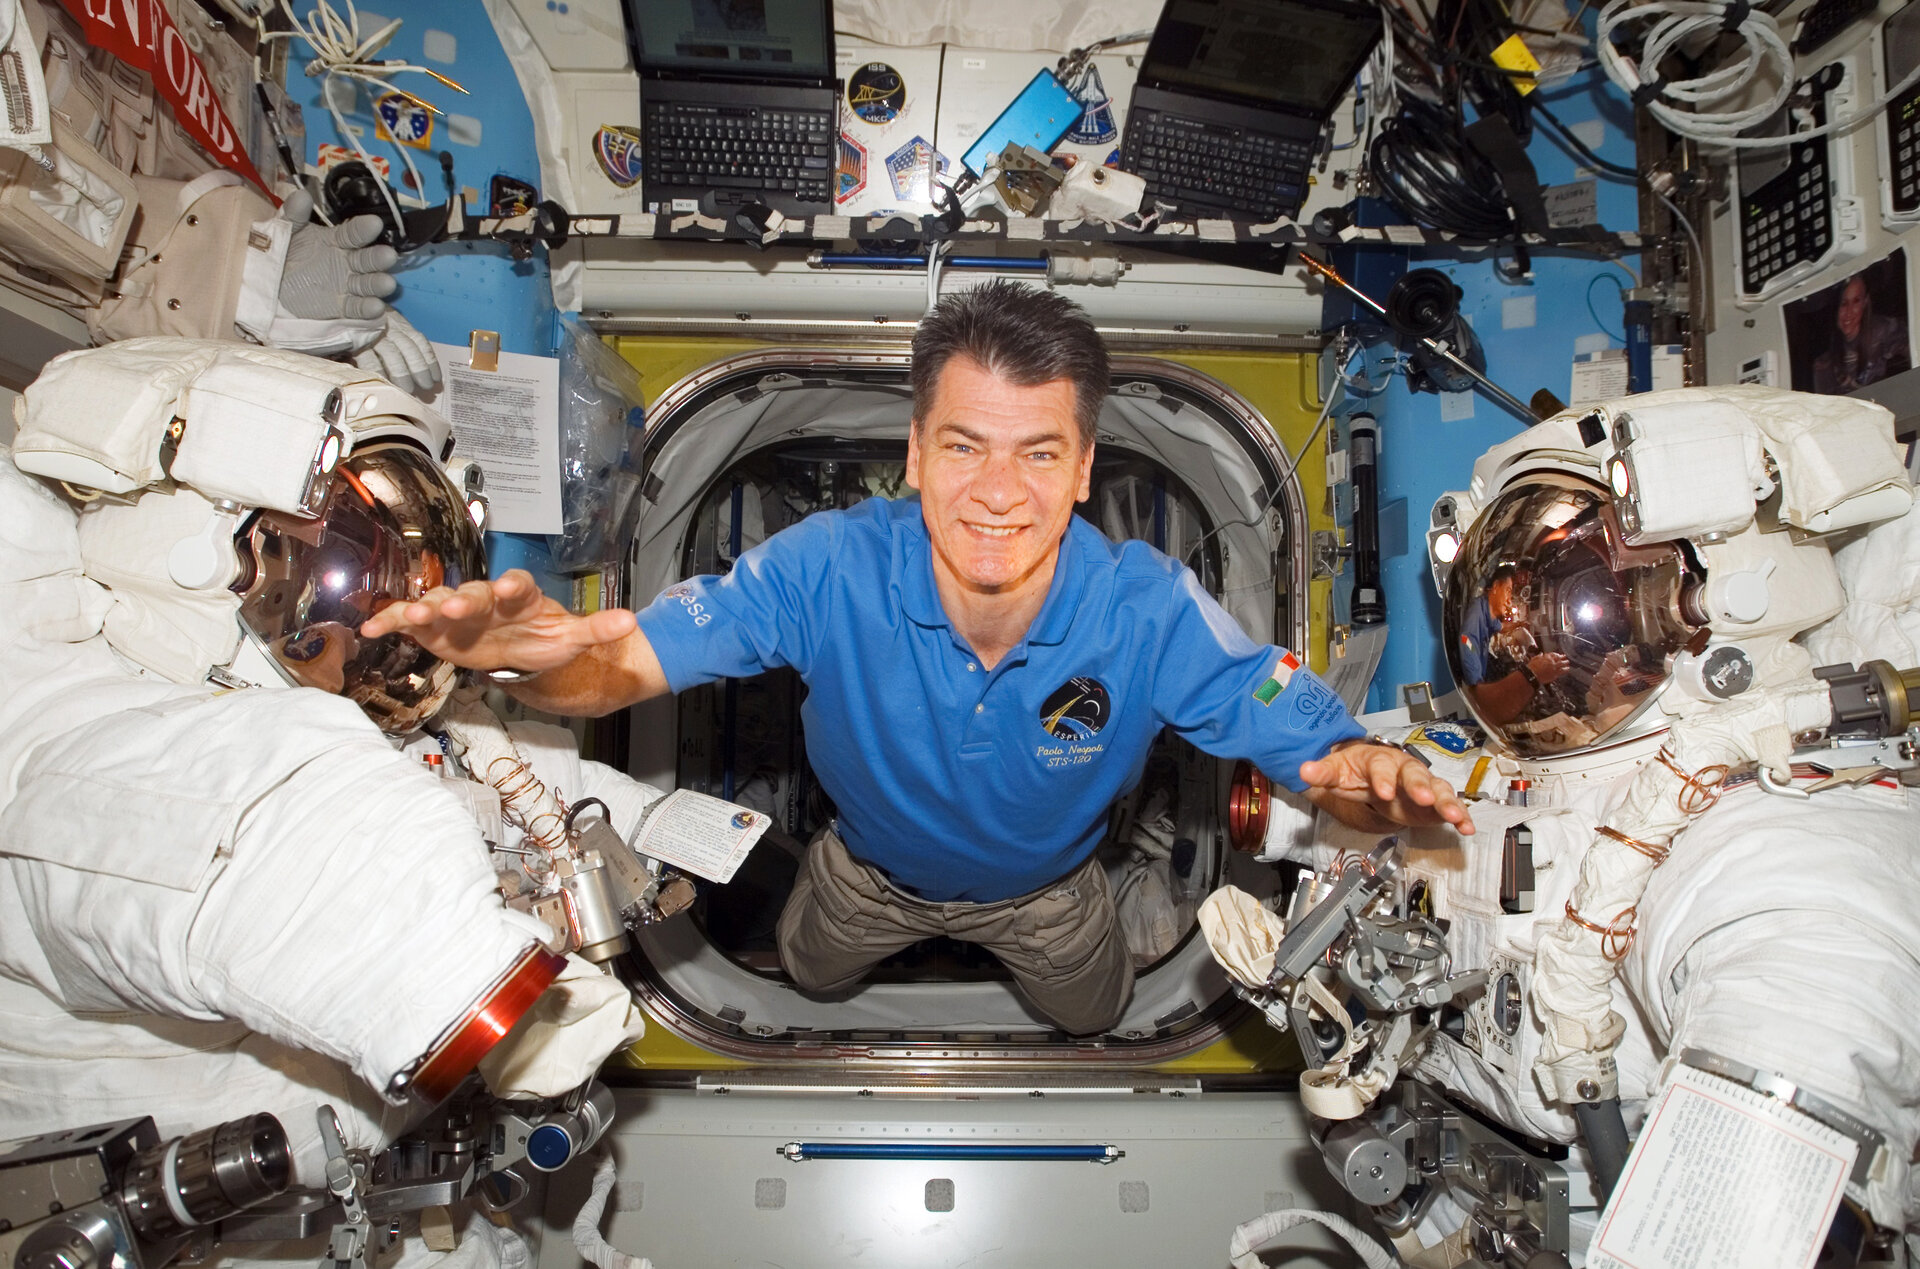 ESA astronaut Paolo Nespoli inside the Station's Quest Airlock